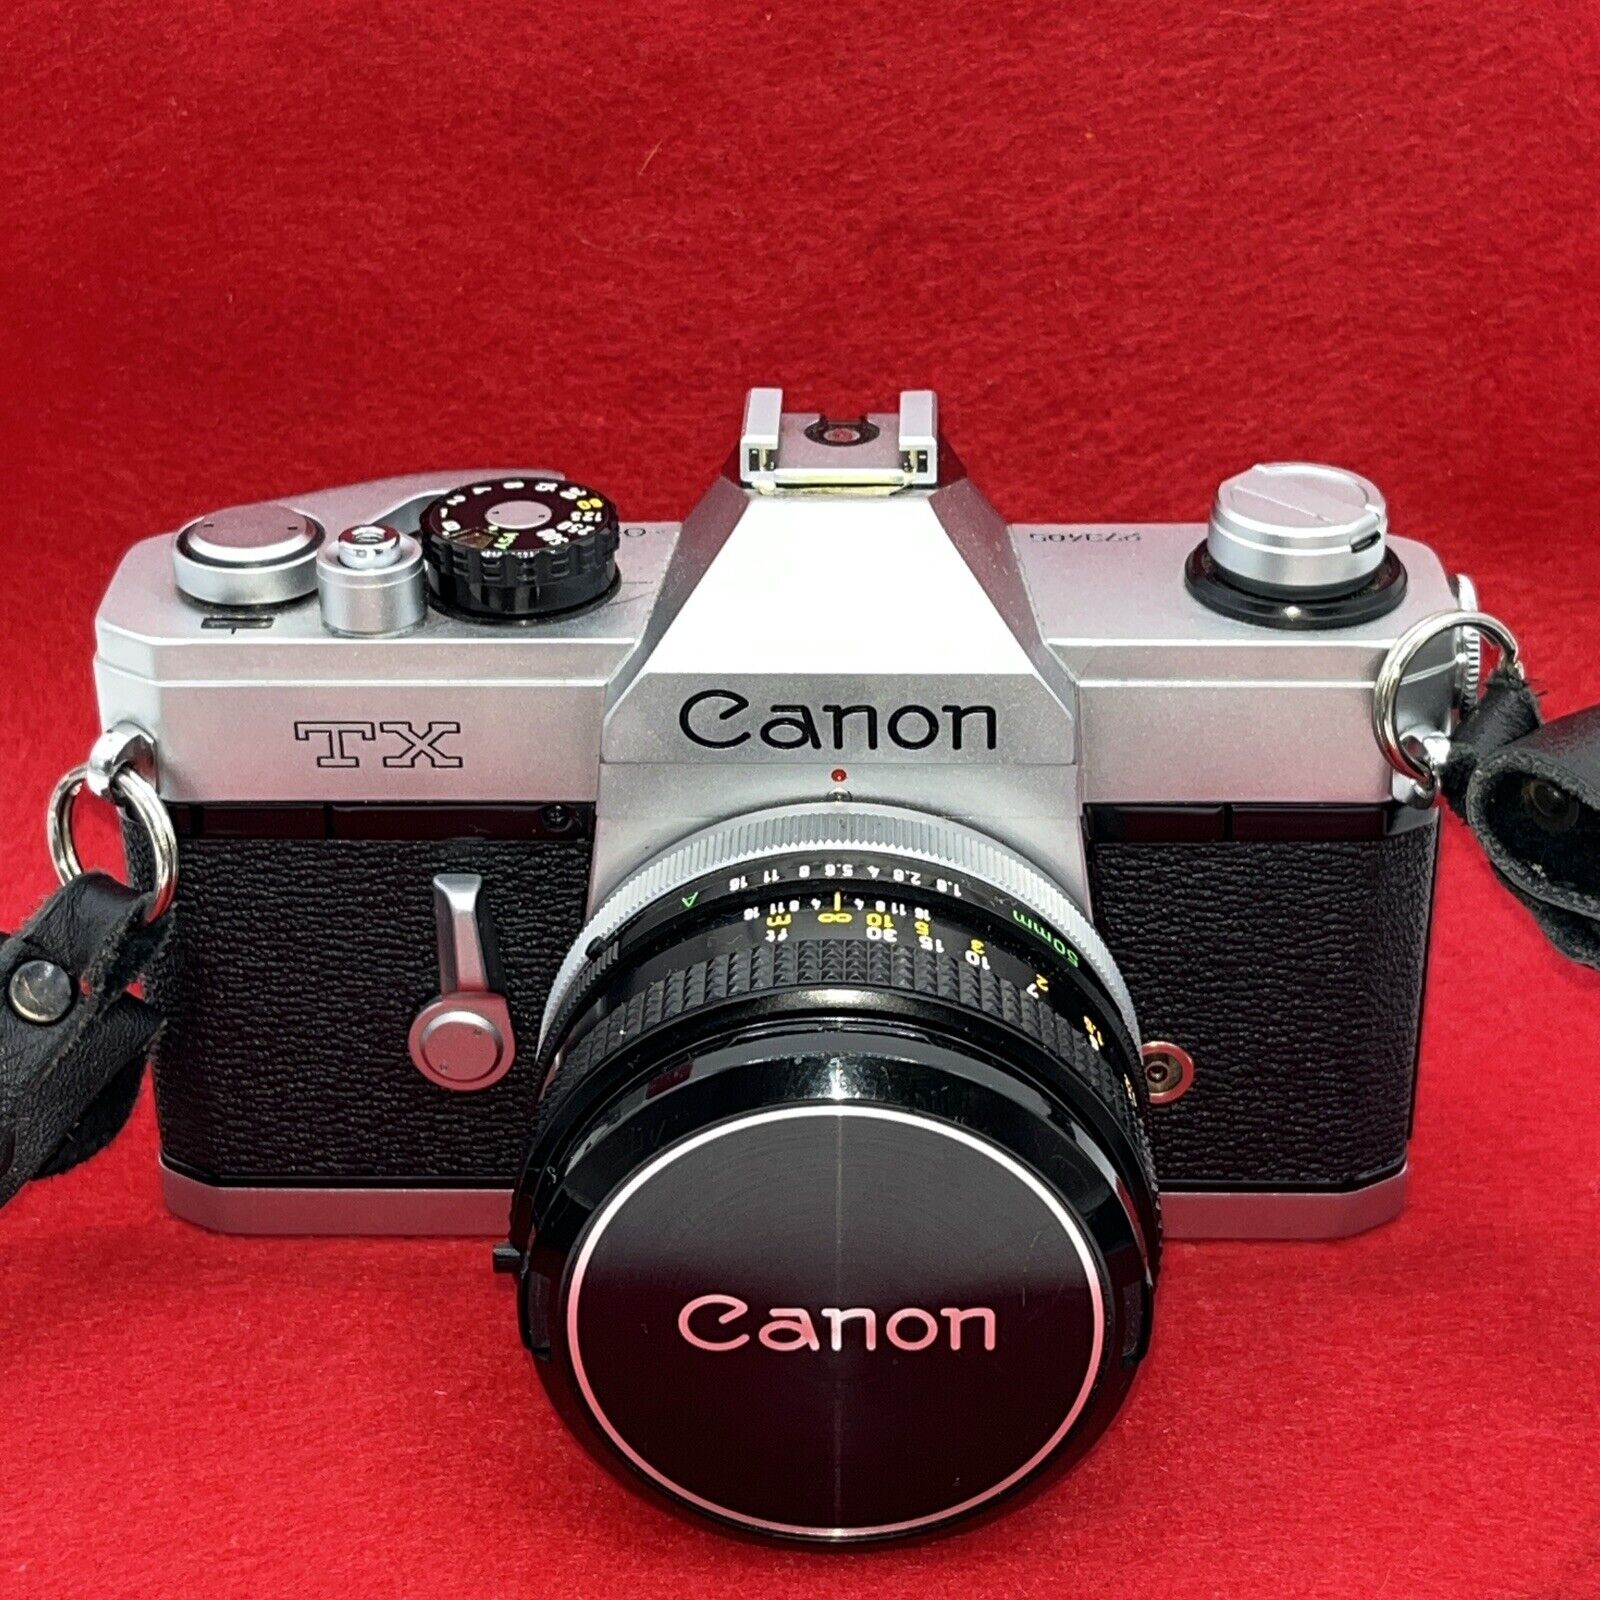 Canon TX 35mm Film SLR Camera 50mm Canon FD f1.8 Lens, Tested Works Vintage